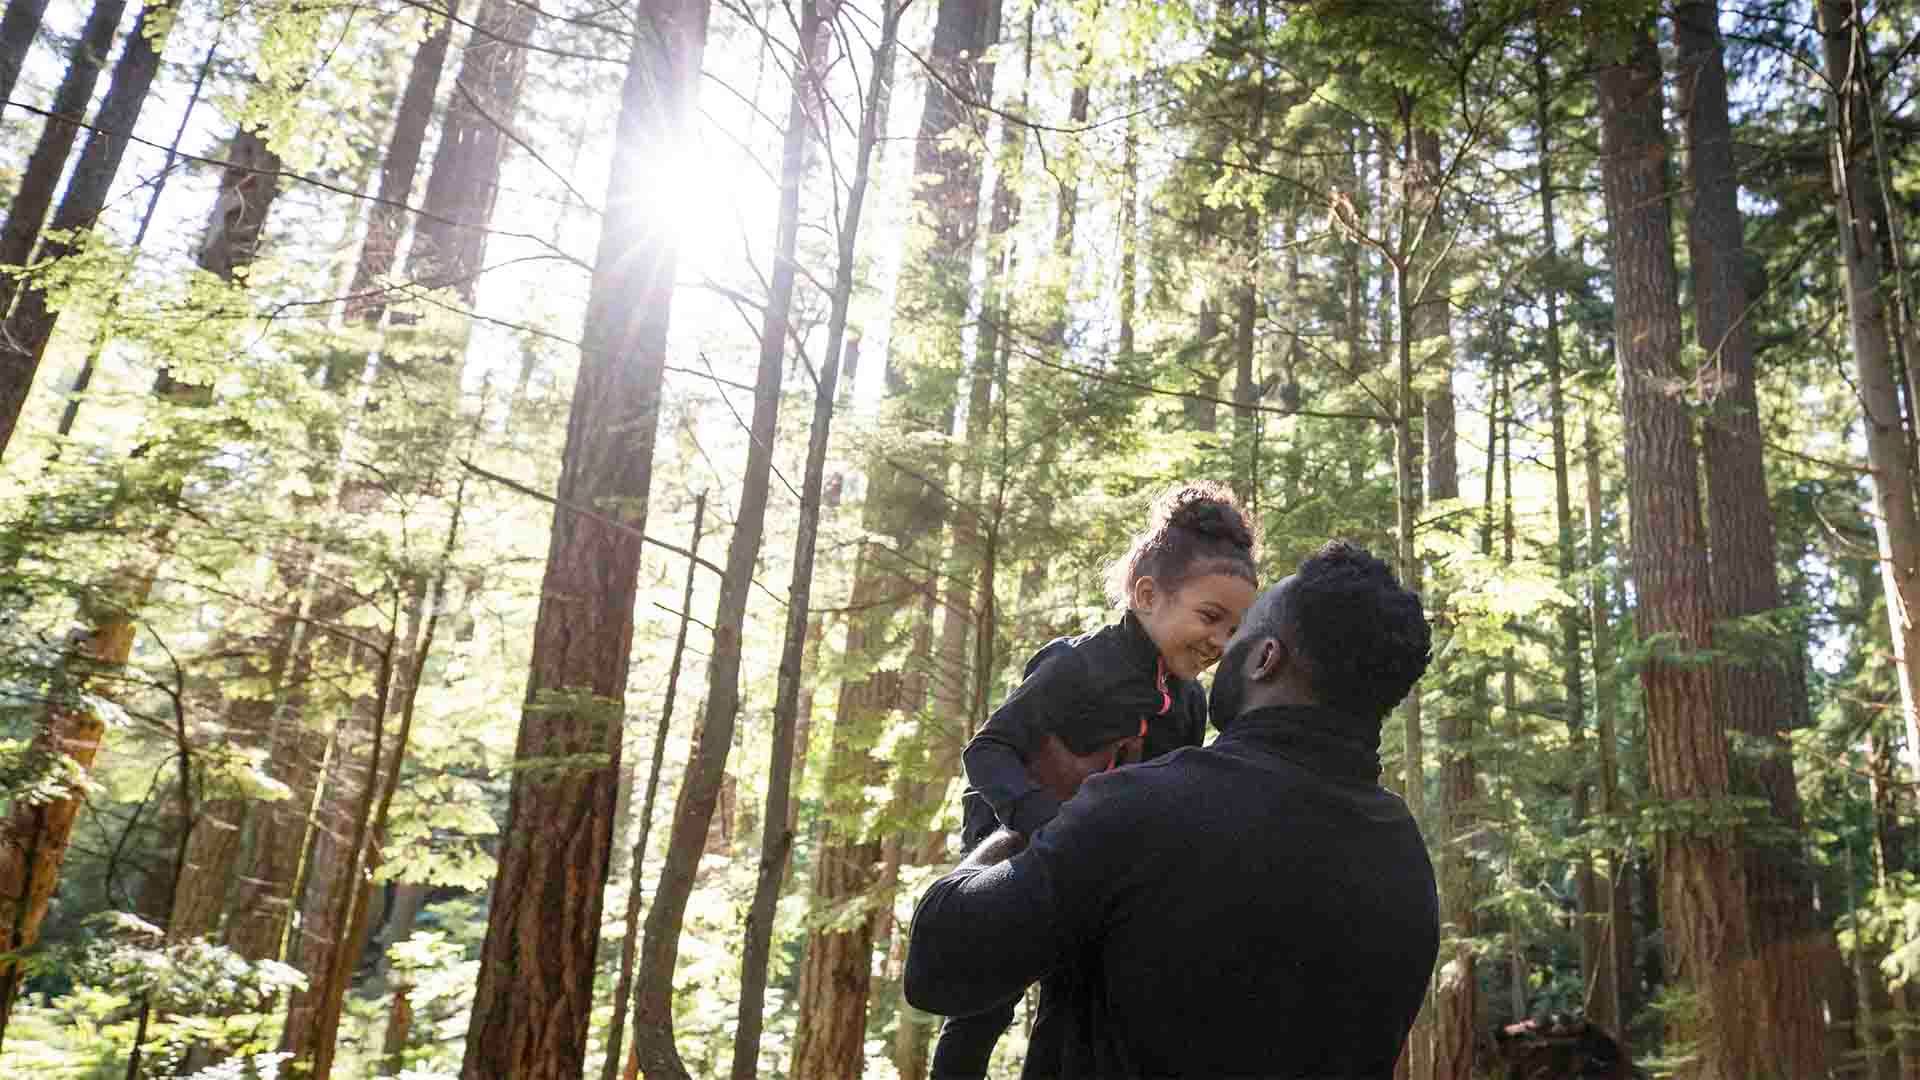 A man bonding with his daughter in a forest. The hospitality sector is recovering post-COVID.
